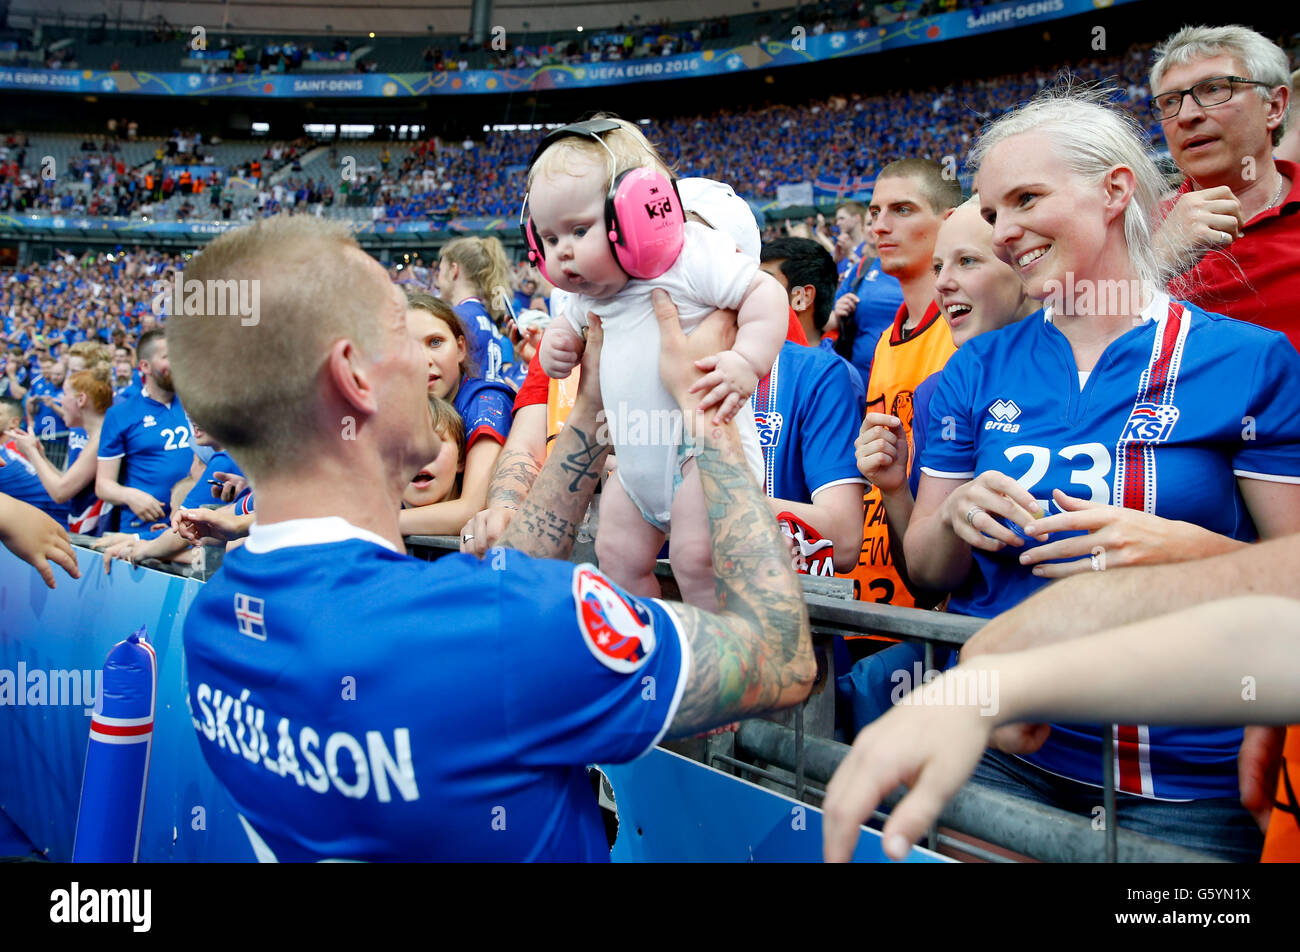 Iceland's Ari Freyr Skulason holds a baby from the crowd as he celebrates qualifying for the last 16 round after the Euro 2016, Group F match at the Stade de France, Paris. after qualifying for the last 16 round after the Euro 2016, Group F match at the Stade de France, Paris. PRESS ASSOCIATION Photo. Picture date: Wednesday June 22, 2016. See PA story soccer Iceland. Photo credit should read: Owen Humphreys/PA Wire. Stock Photo